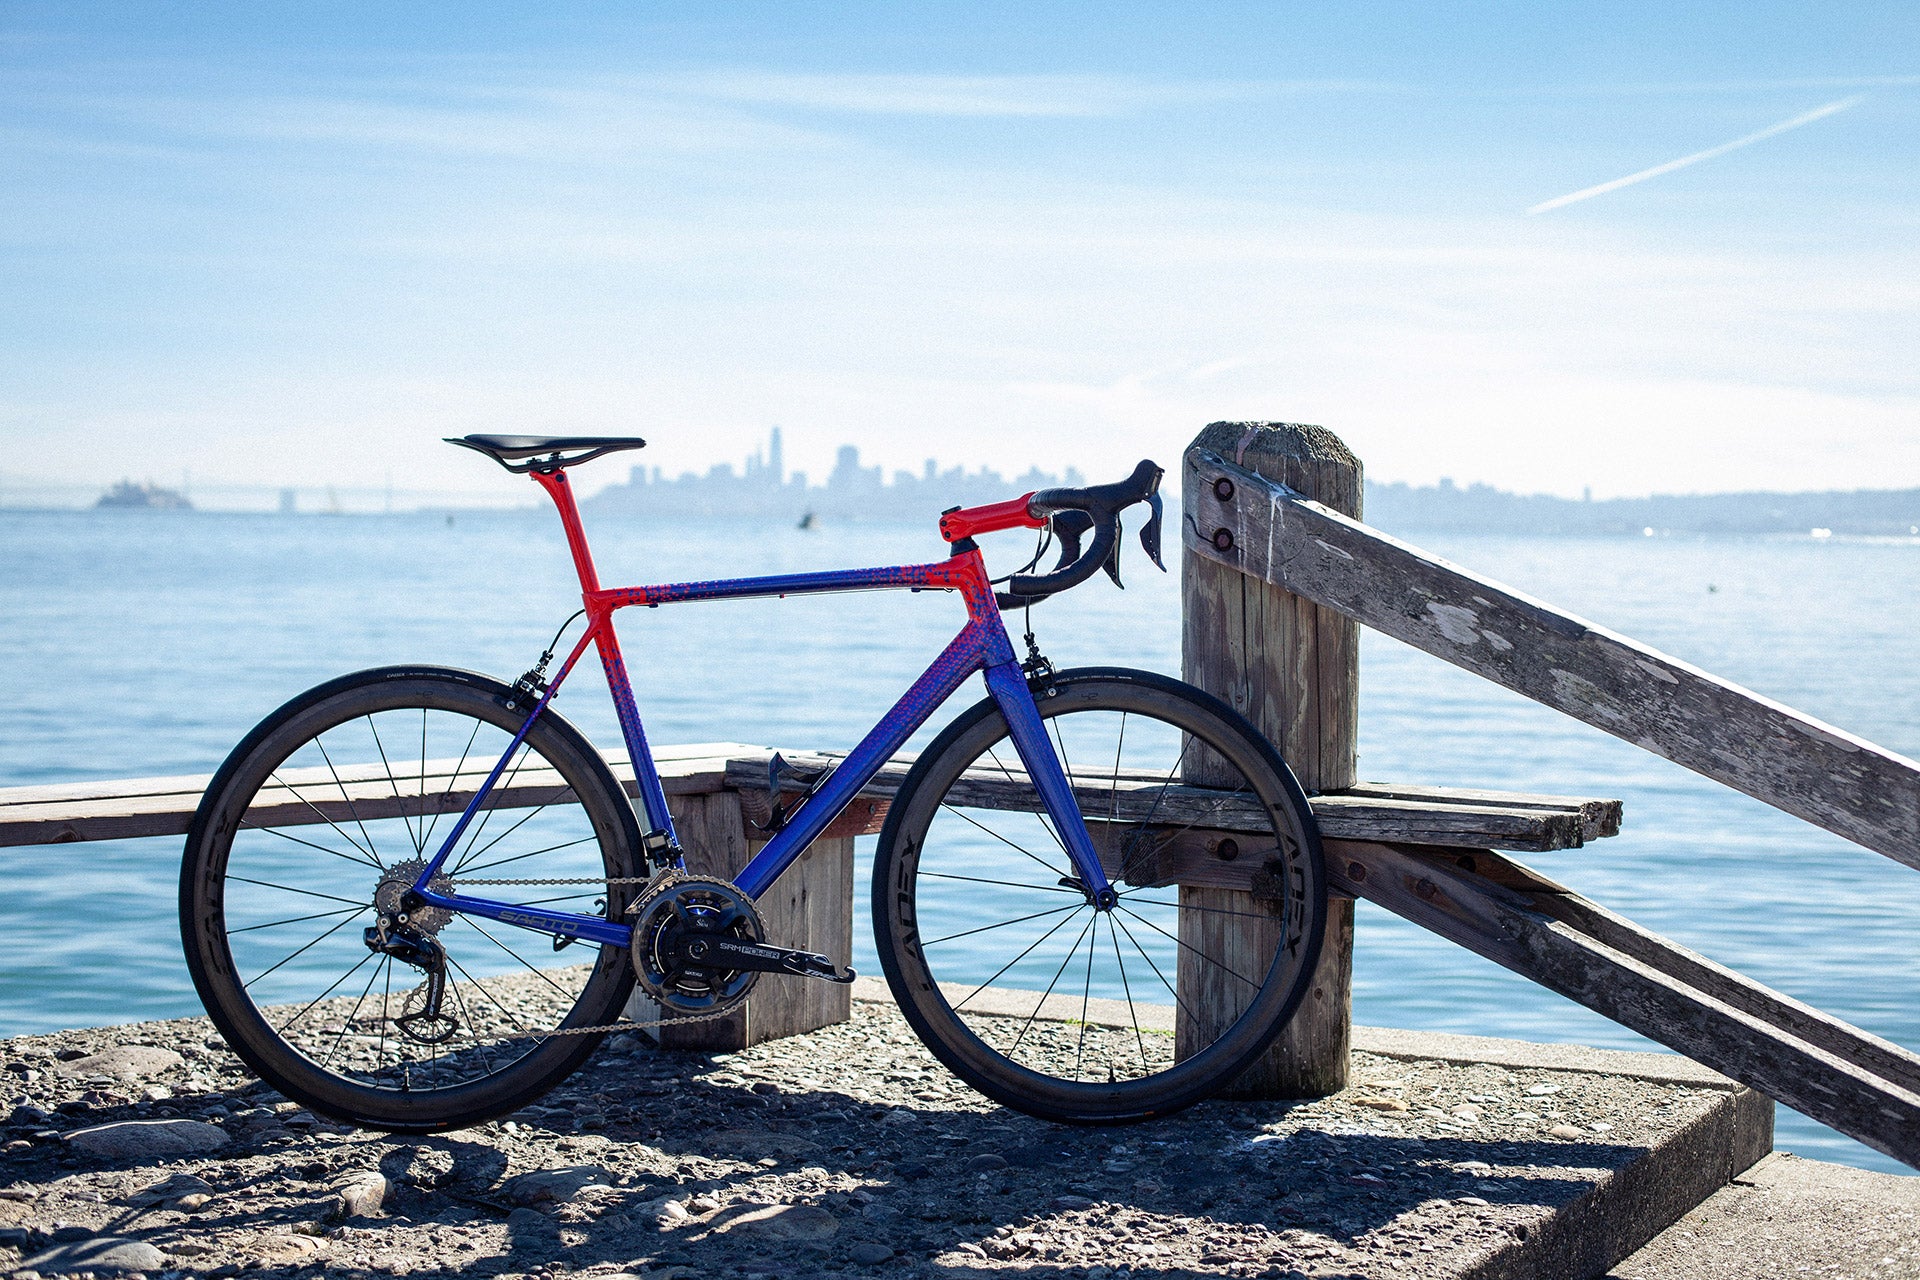 Month by Month: The 2023 Above Category Dream Bike Calendar